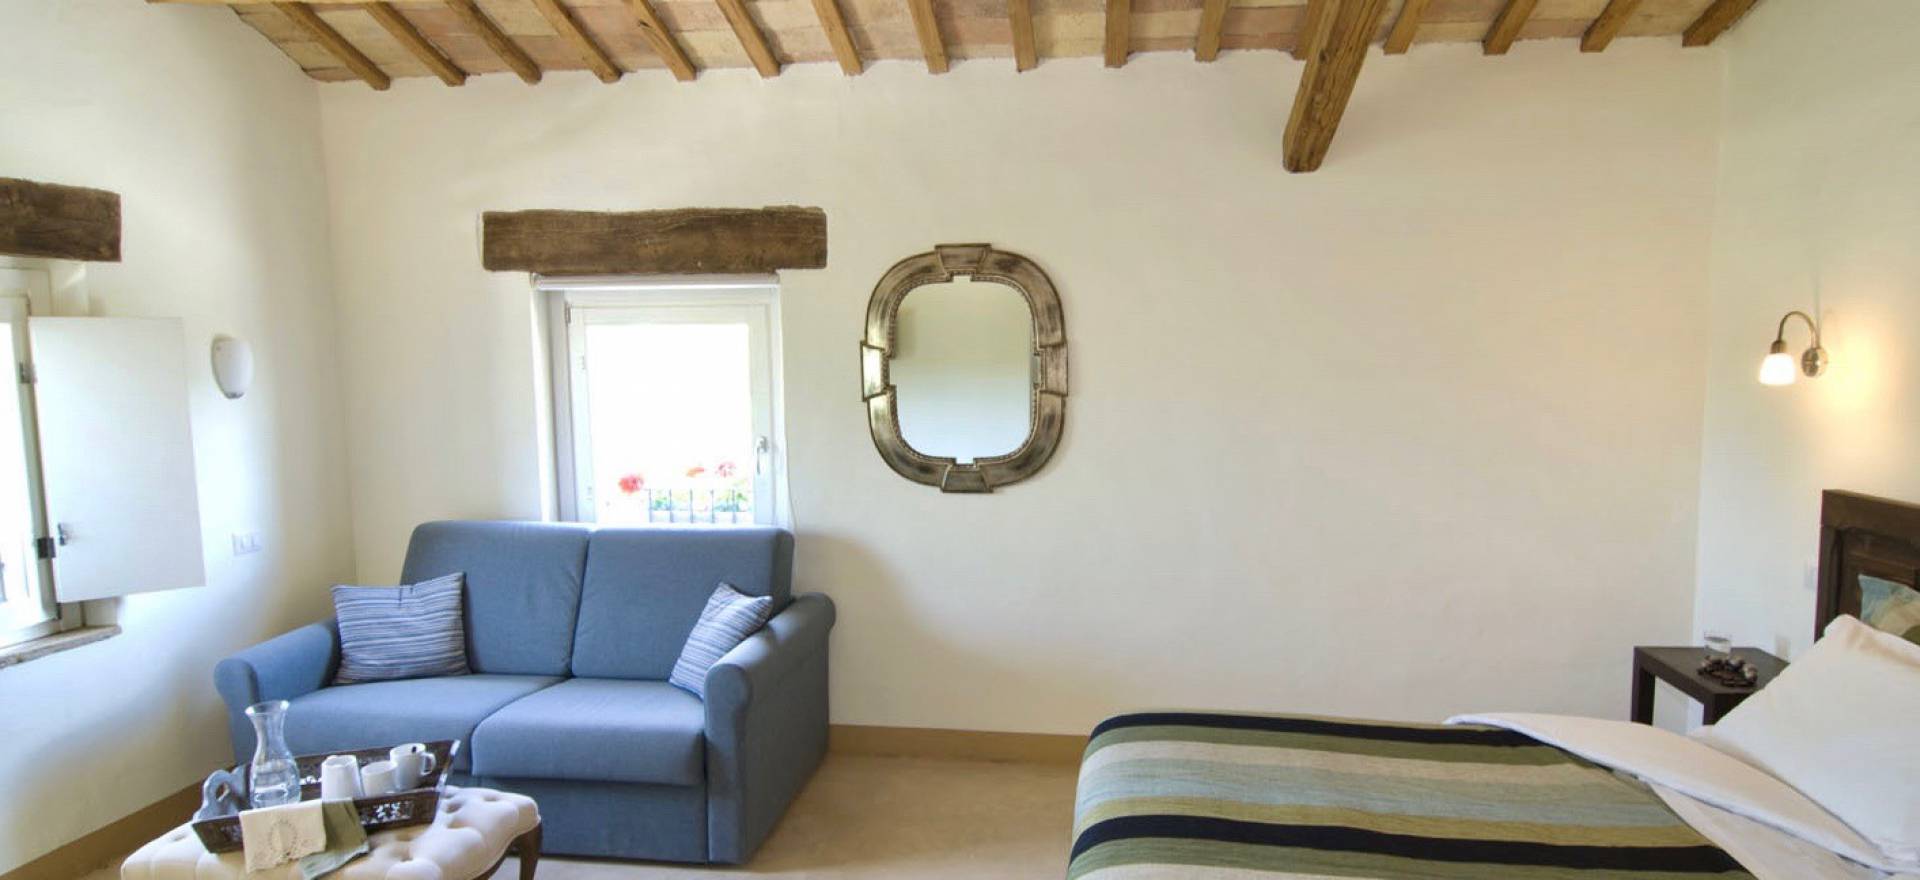 Agriturismo Marche Agriturismo Marche, beautiful rooms and welcoming